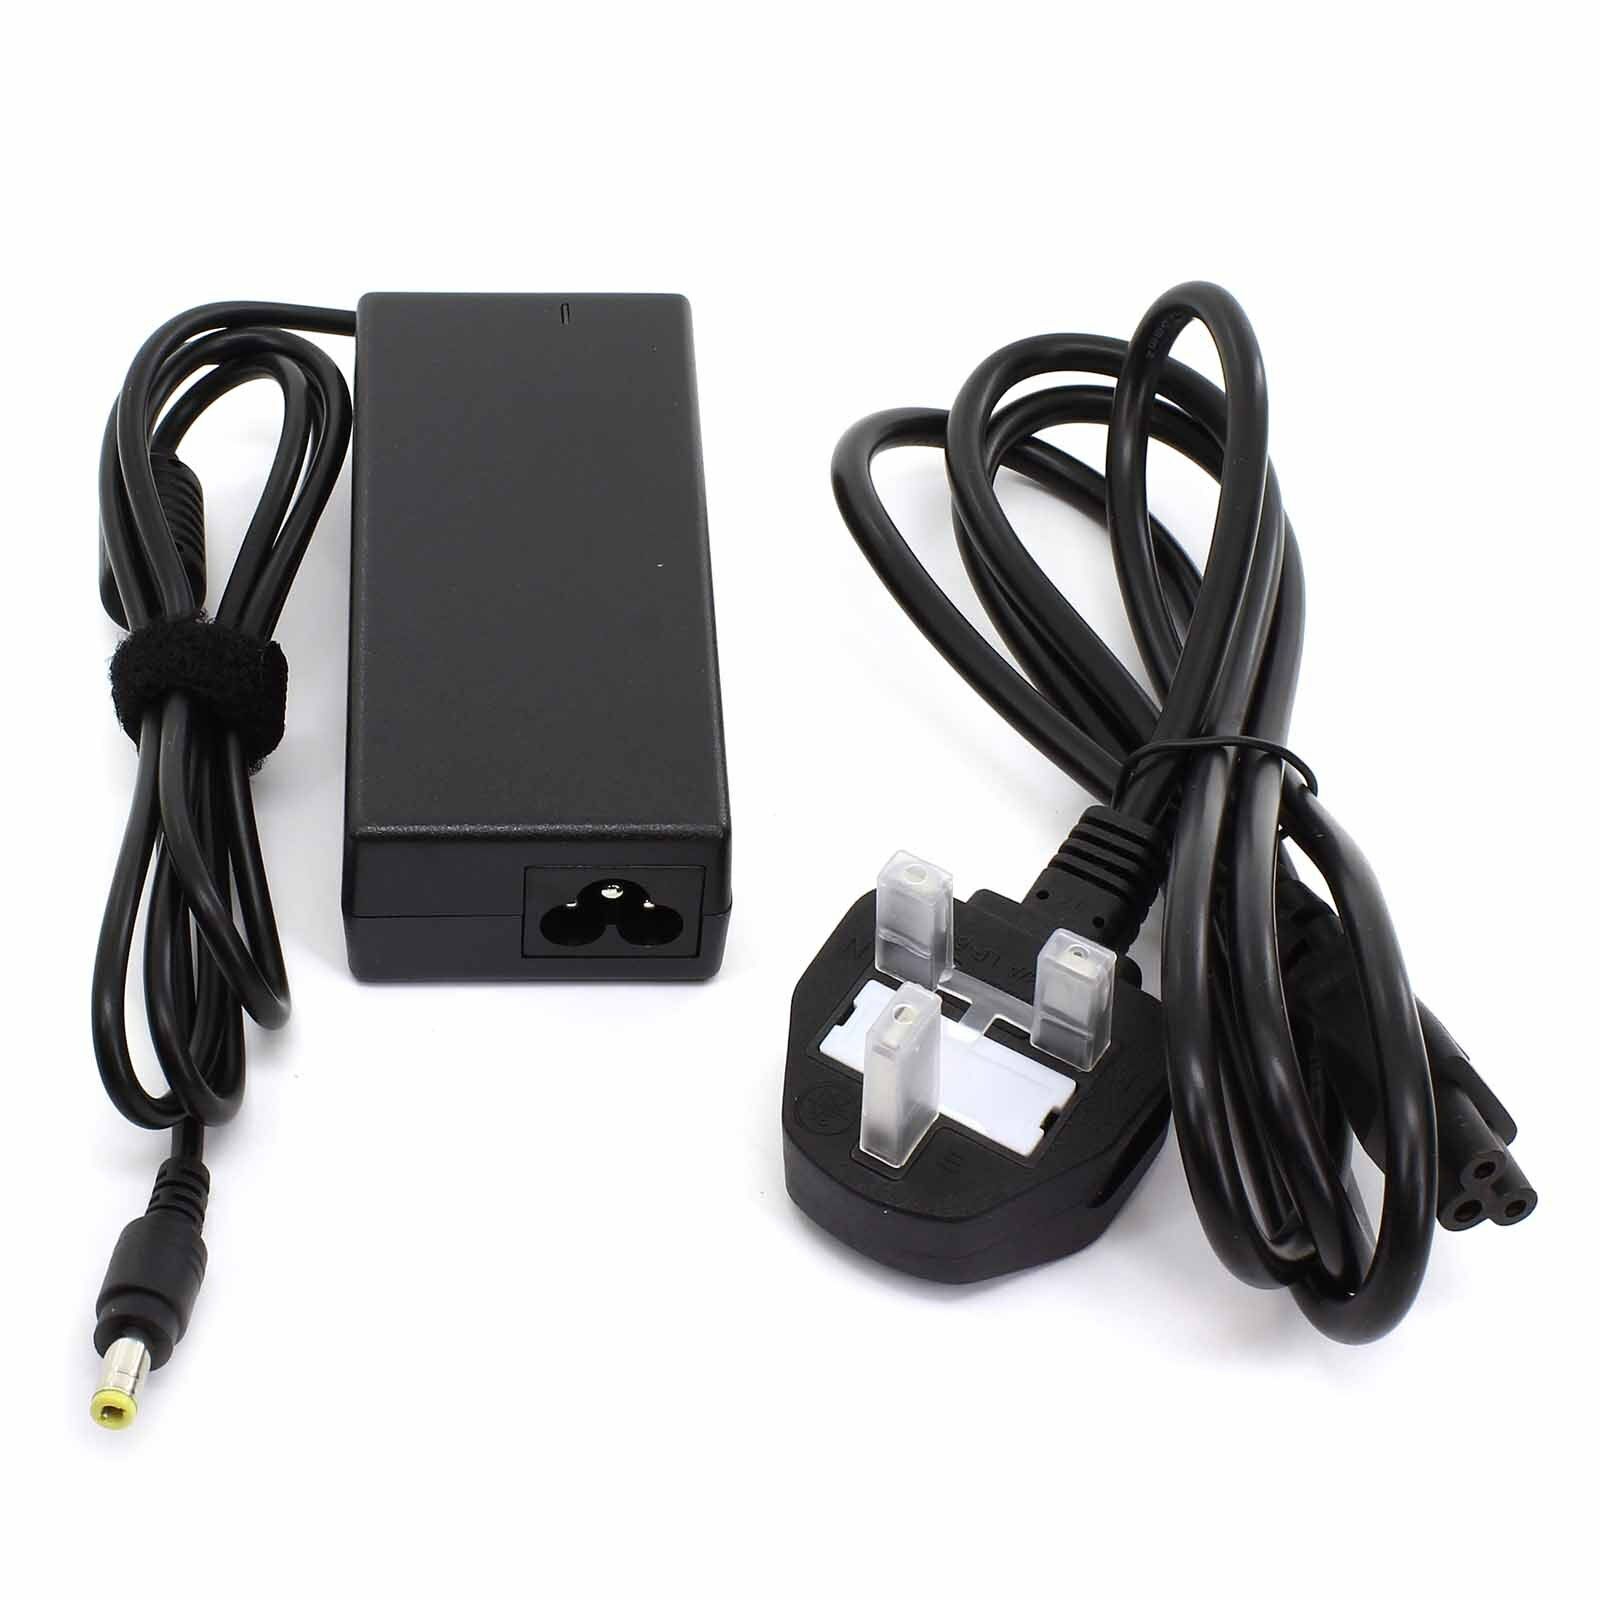 *Brand NEW*APD DA-34A02 AC Adapter For Asian Power Devices 5Vdc 2A 12Vdc 2A Power Supply Cord